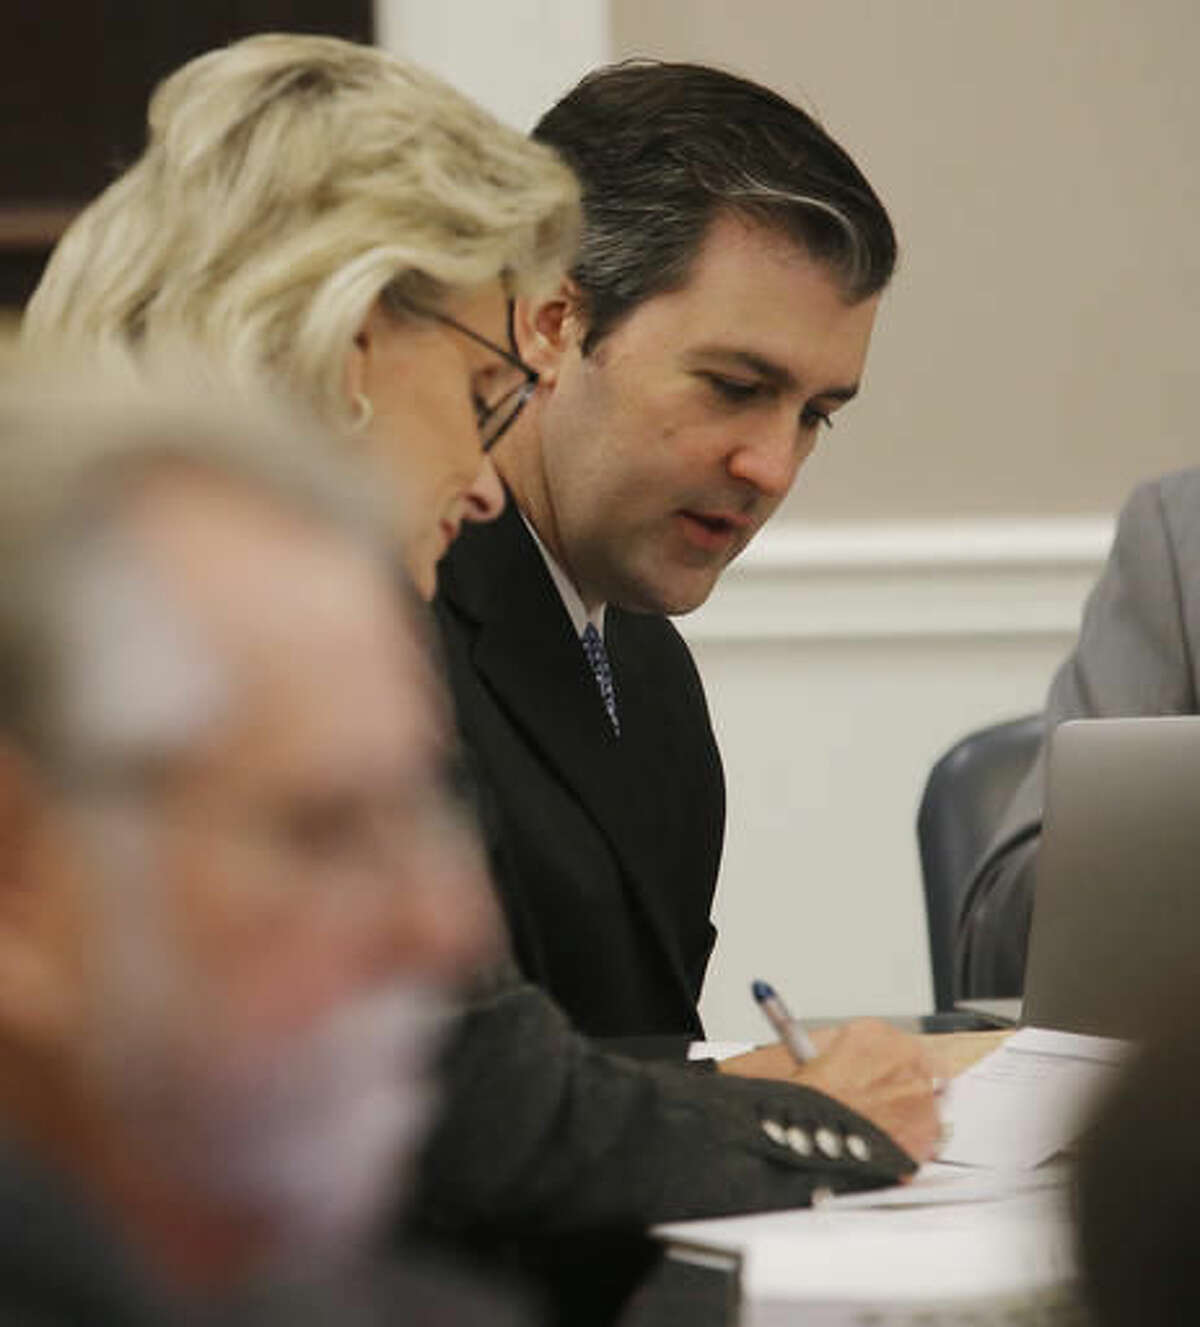 Former North Charleston Police Officer Michael Slager, right, sits at the defense table during testimony in Slager's murder trial, Monday, Nov. 7, 2016, in Charleston, S.C. Slager is on trial facing a murder charge in the shooting death of Walter Scott, who was gunned down after he fled from a traffic stop. (Grace Beahm/Post and Courier via AP, Pool, File)